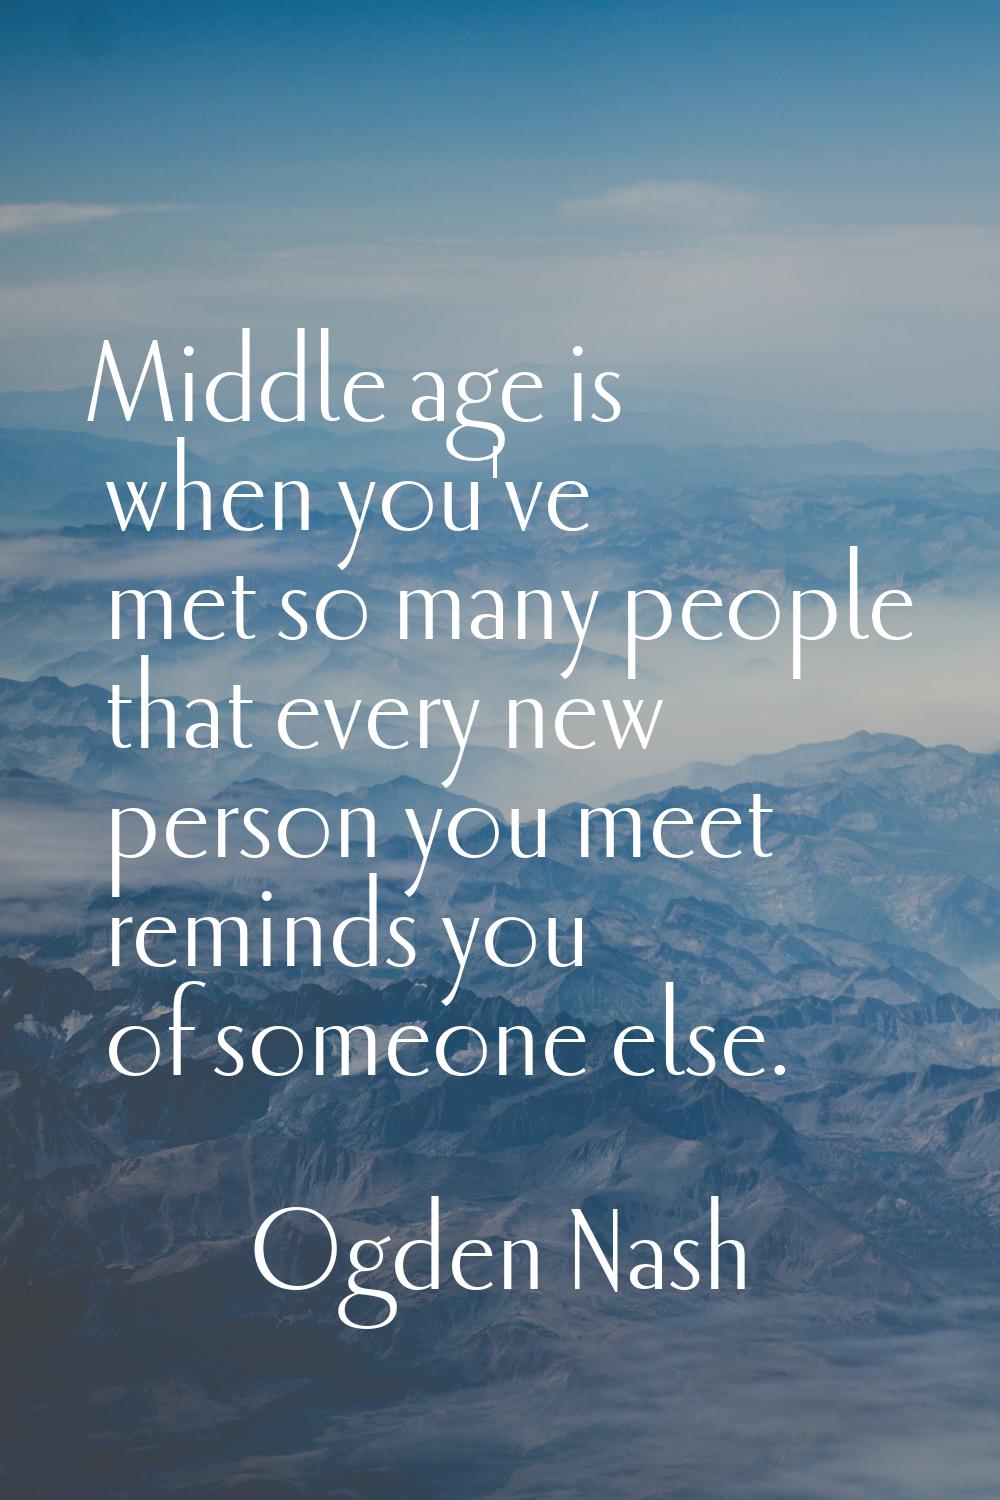 Middle age is when you've met so many people that every new person you meet reminds you of someone 